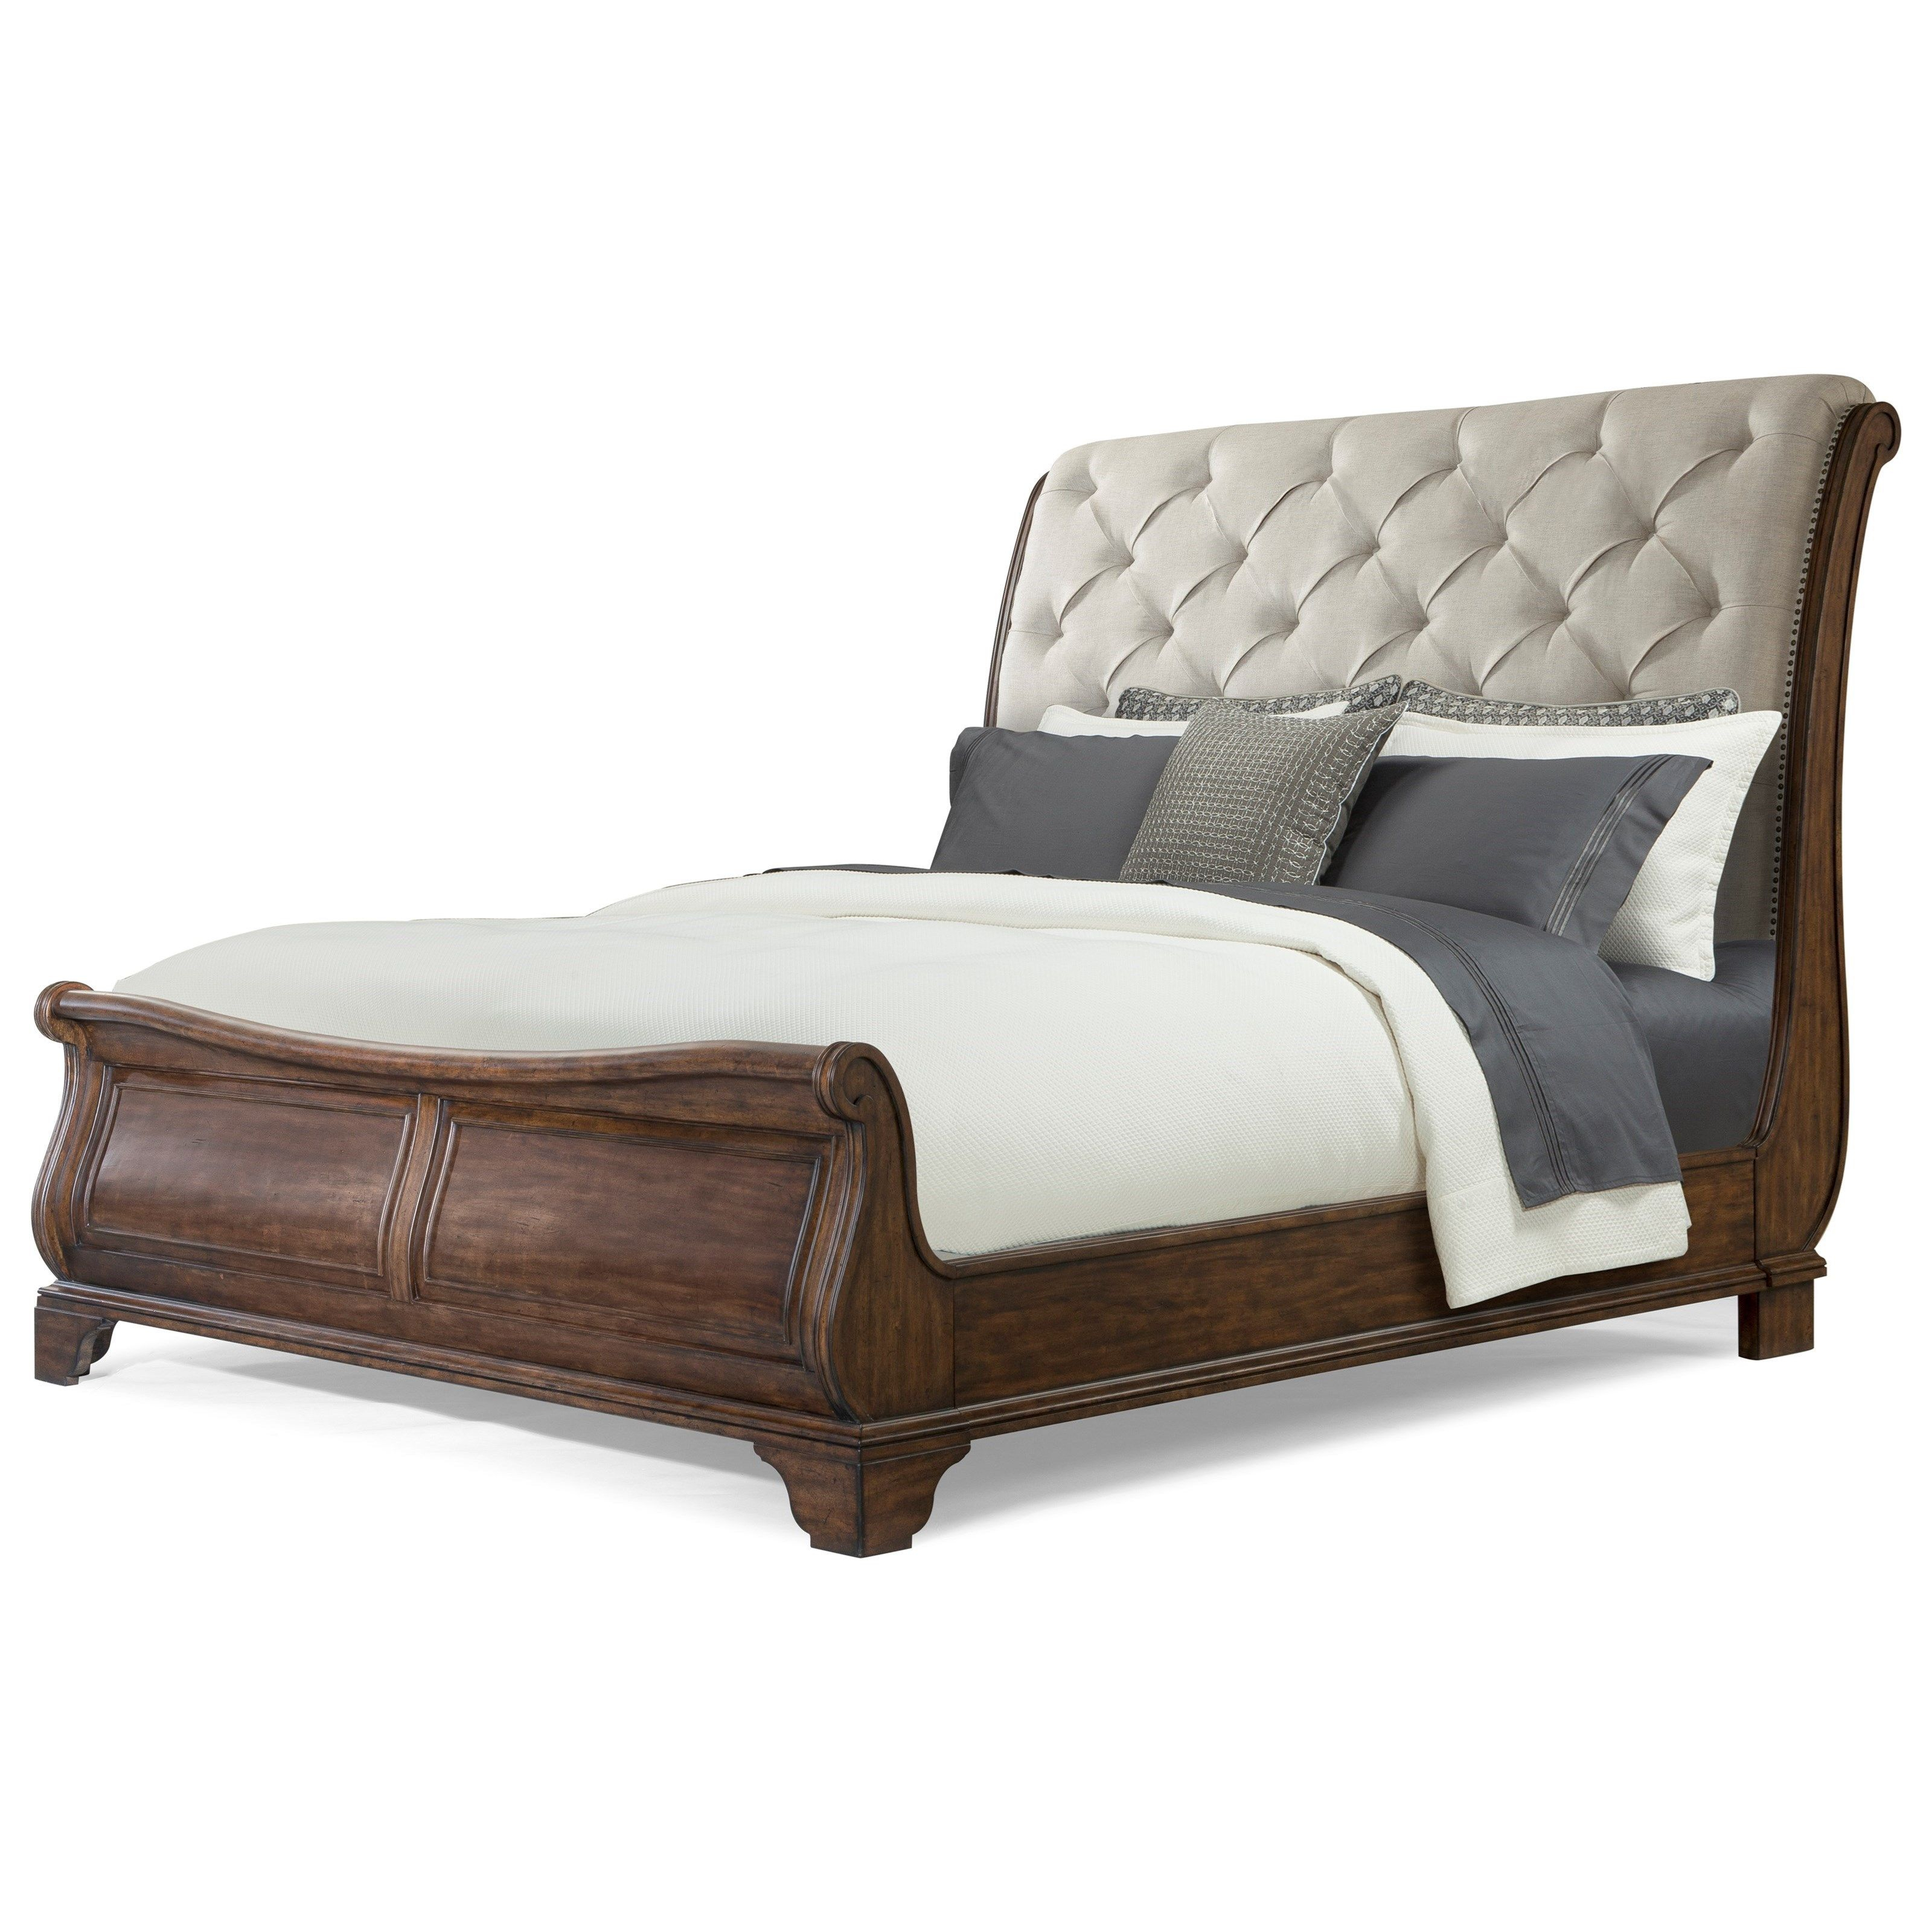 Trisha Yearwood Home Dottie Queen Upholstered Sleigh Bed Trisha inside size 3200 X 3200